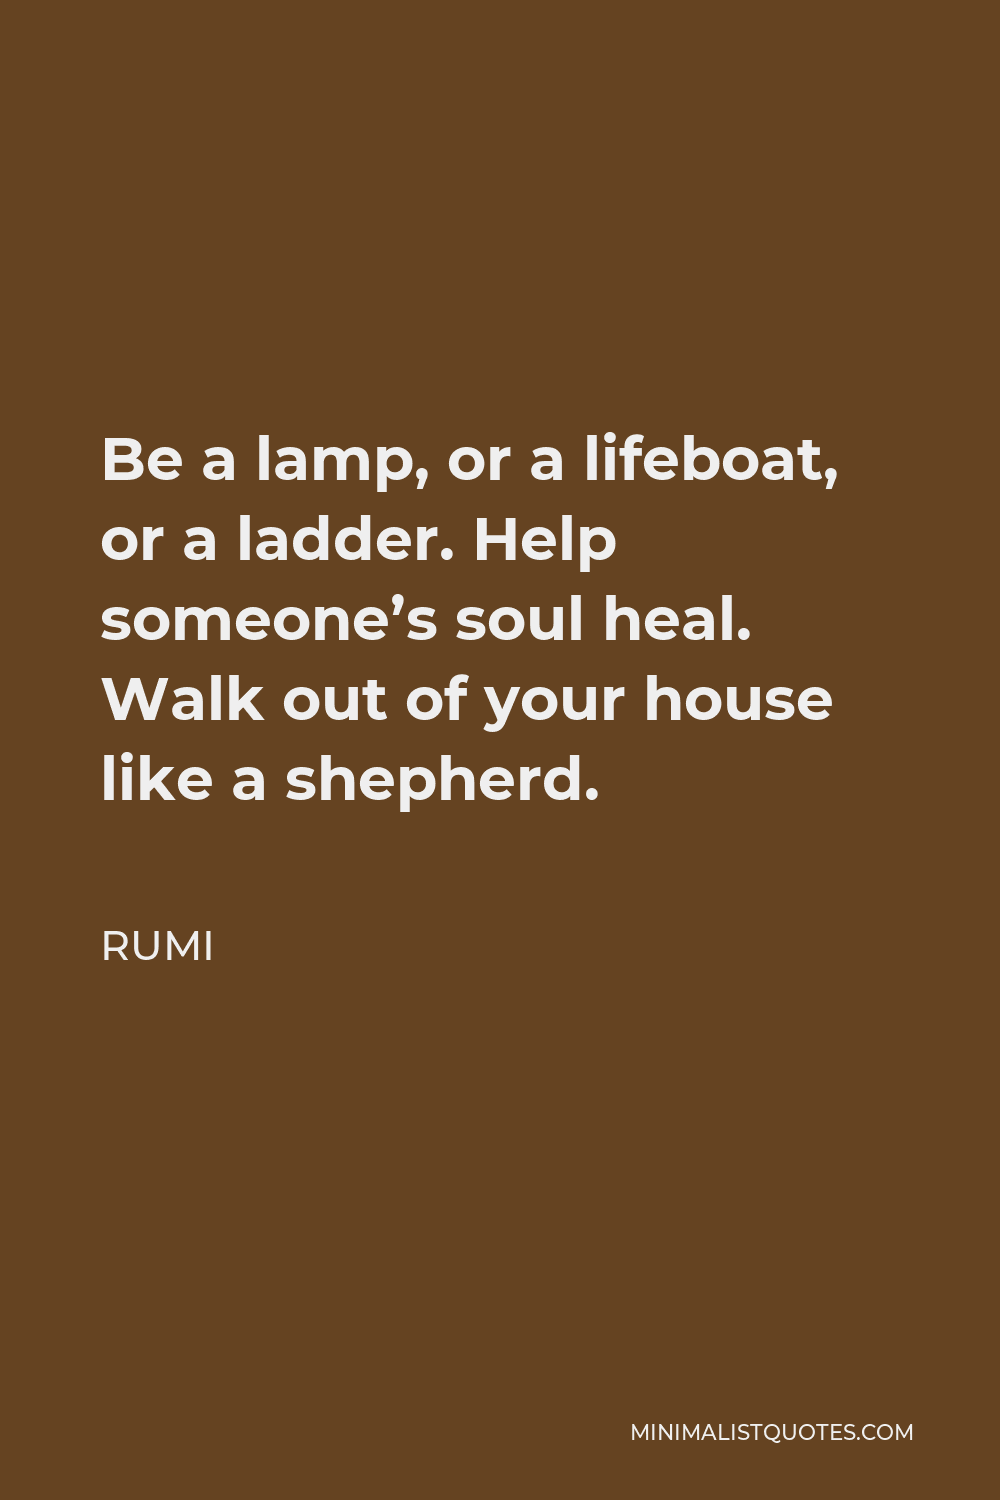 Rumi Quote - Be a lamp, or a lifeboat, or a ladder. Help someone’s soul heal. Walk out of your house like a shepherd.